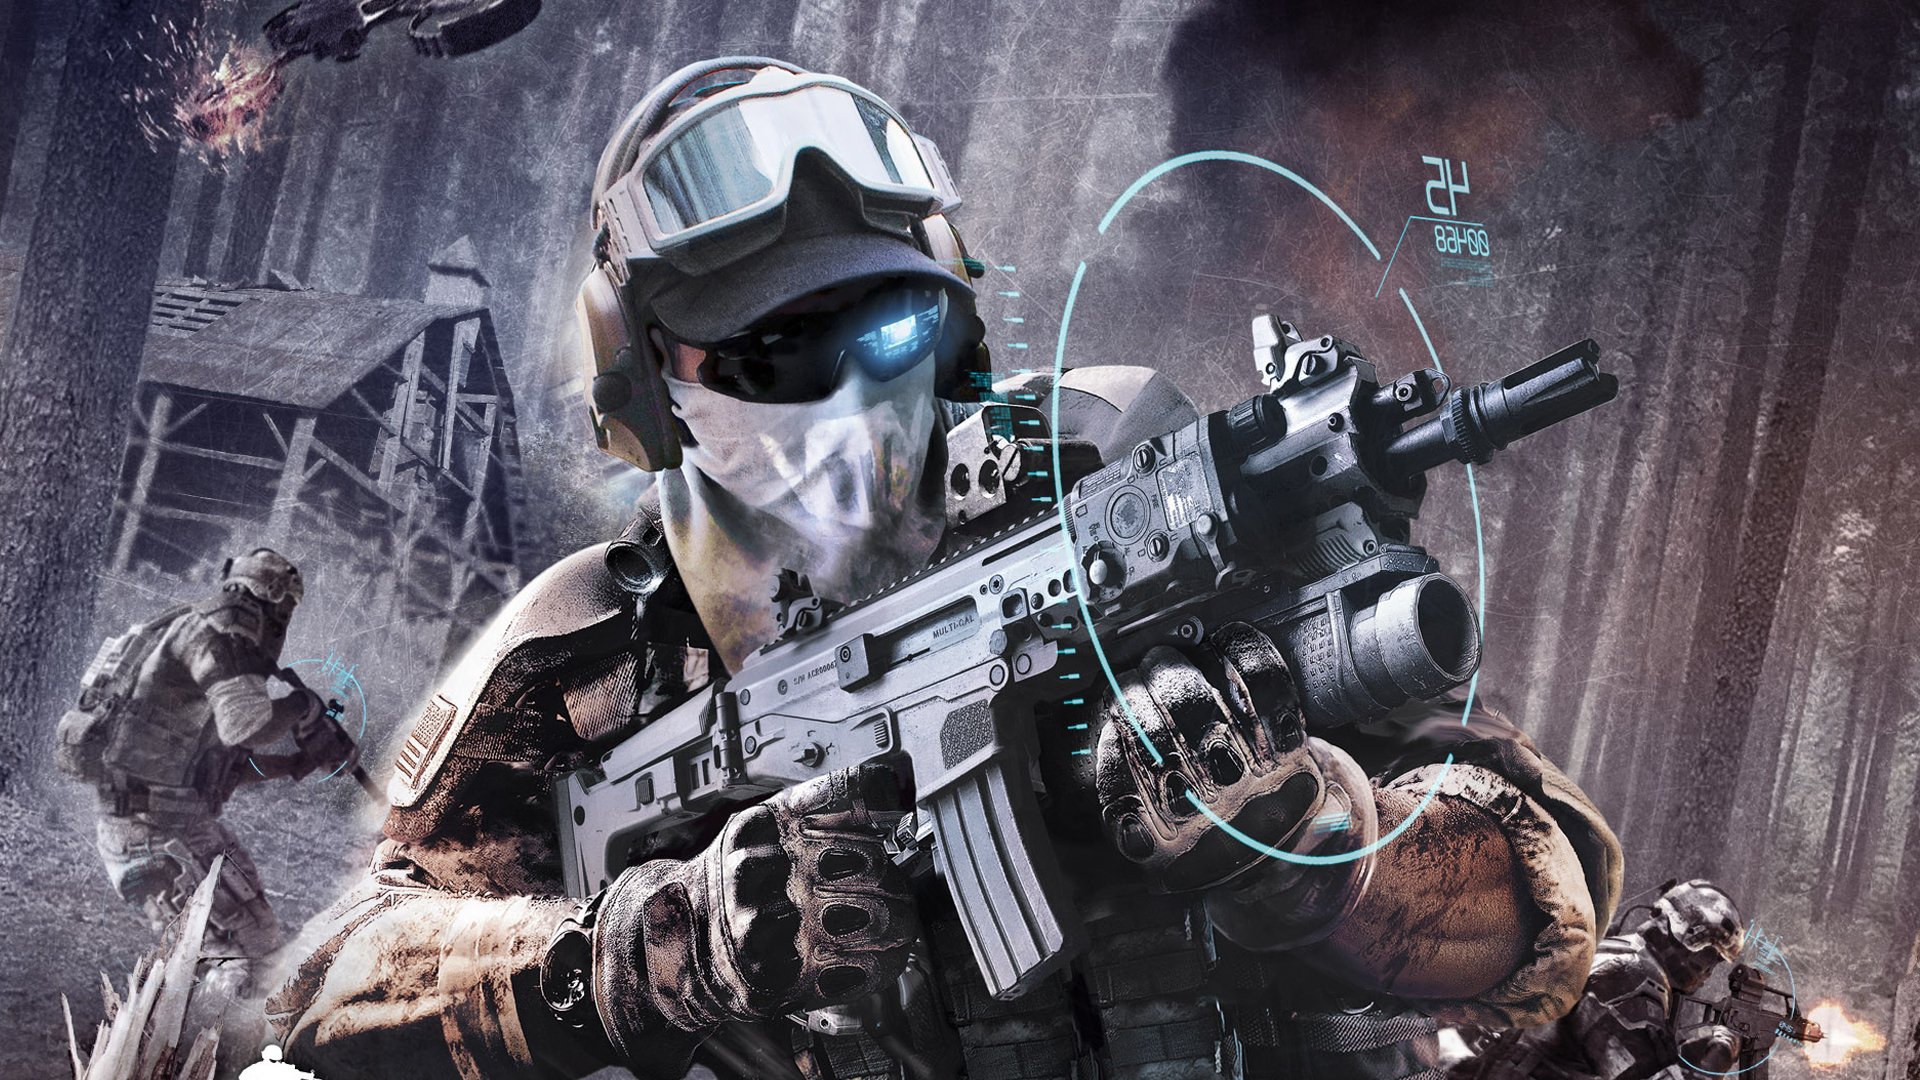 ghost recon future soldier wallpaper,action adventure game,shooter game,gun,games,soldier